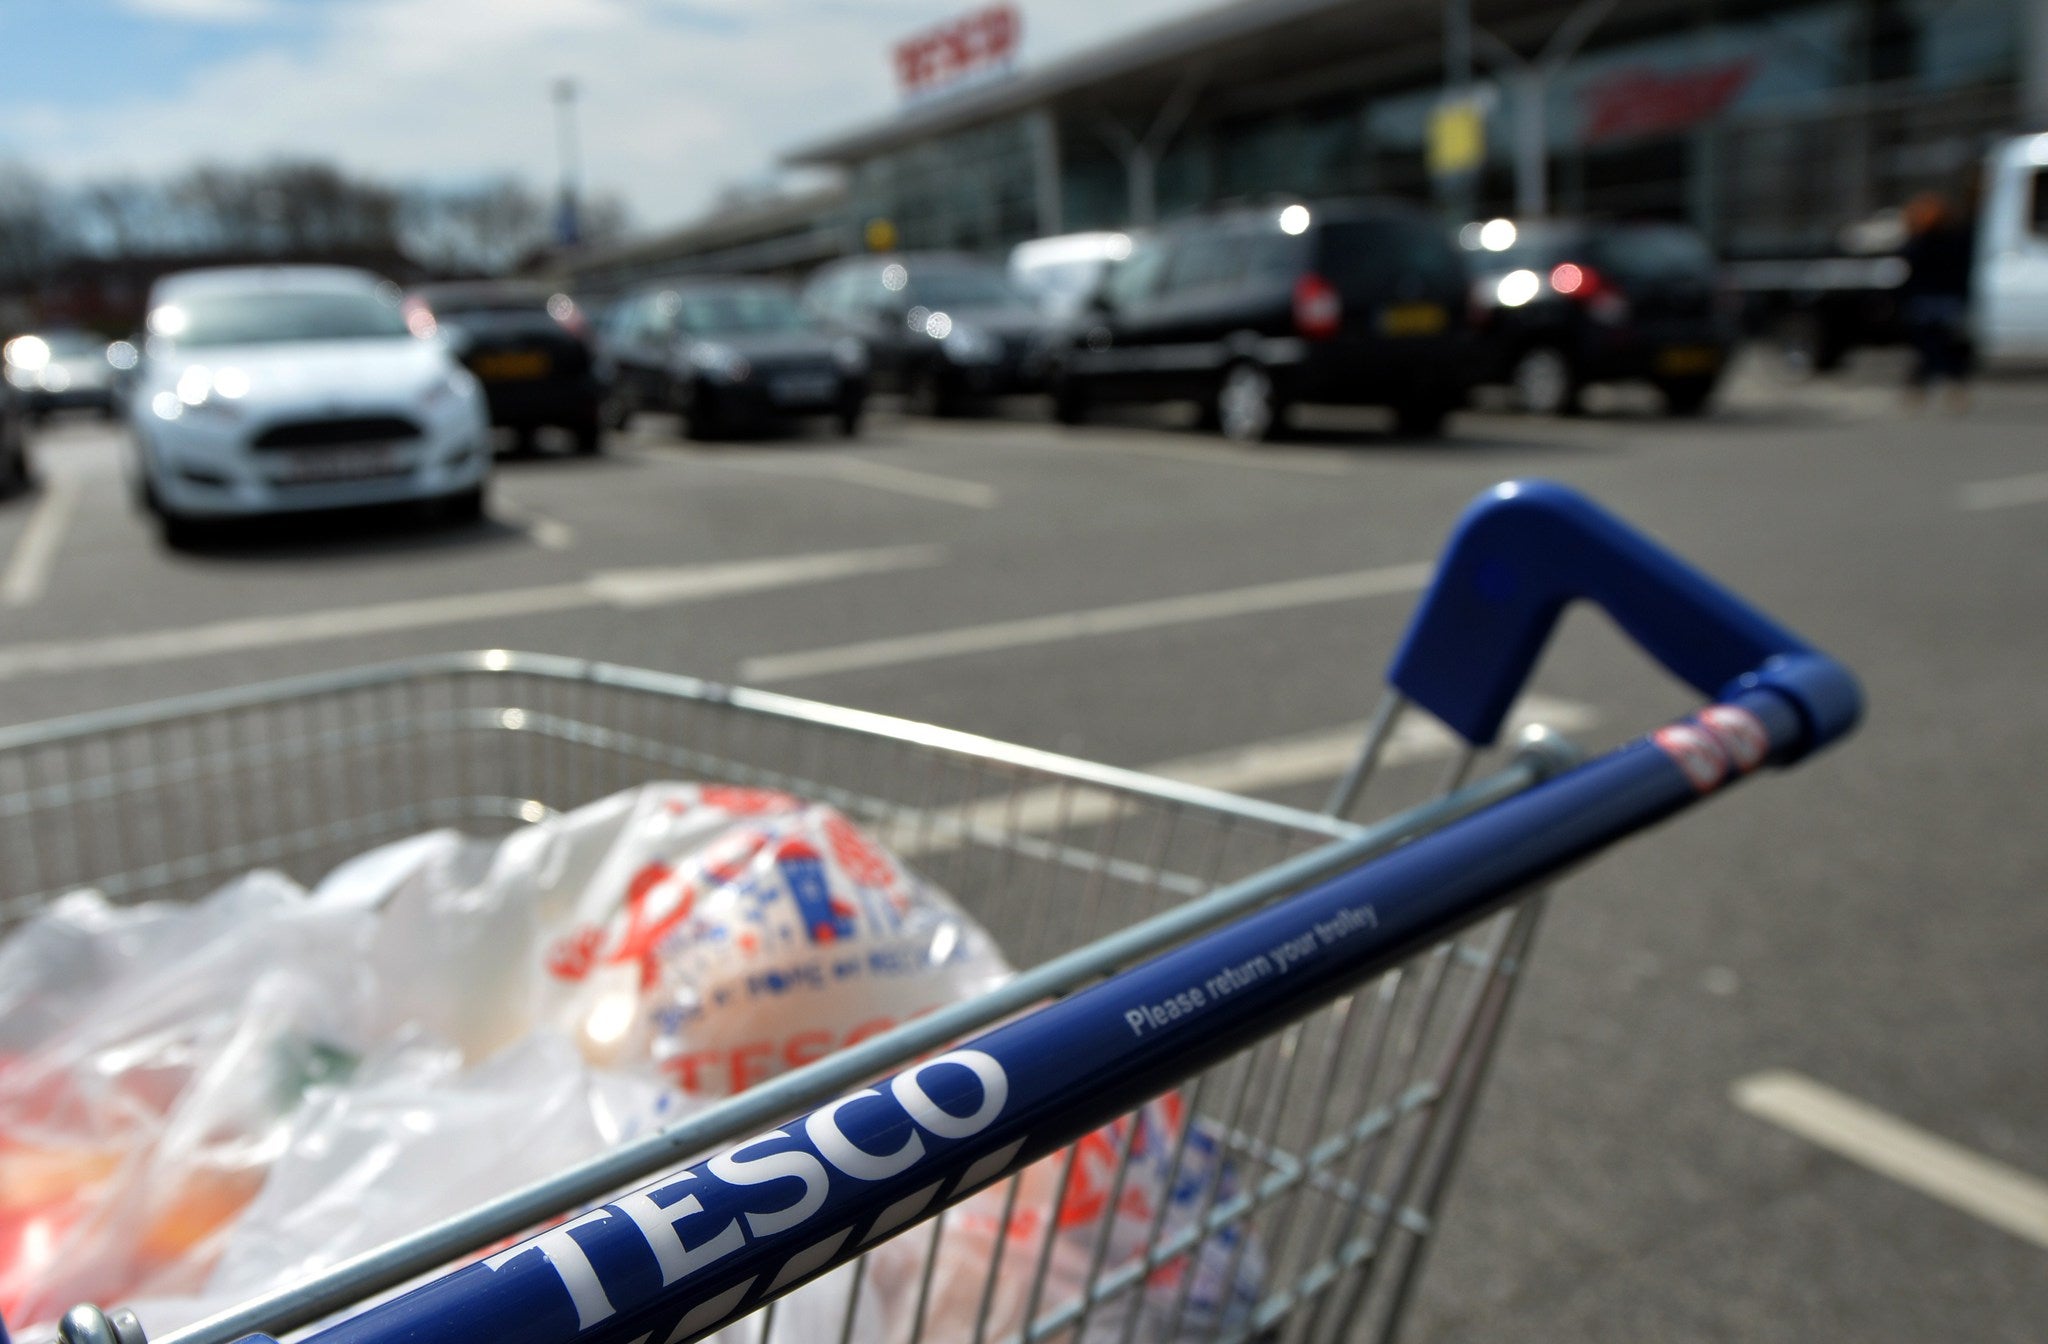 A Tesco in Cambridge may be given a new-look Asbo for not clearing litter